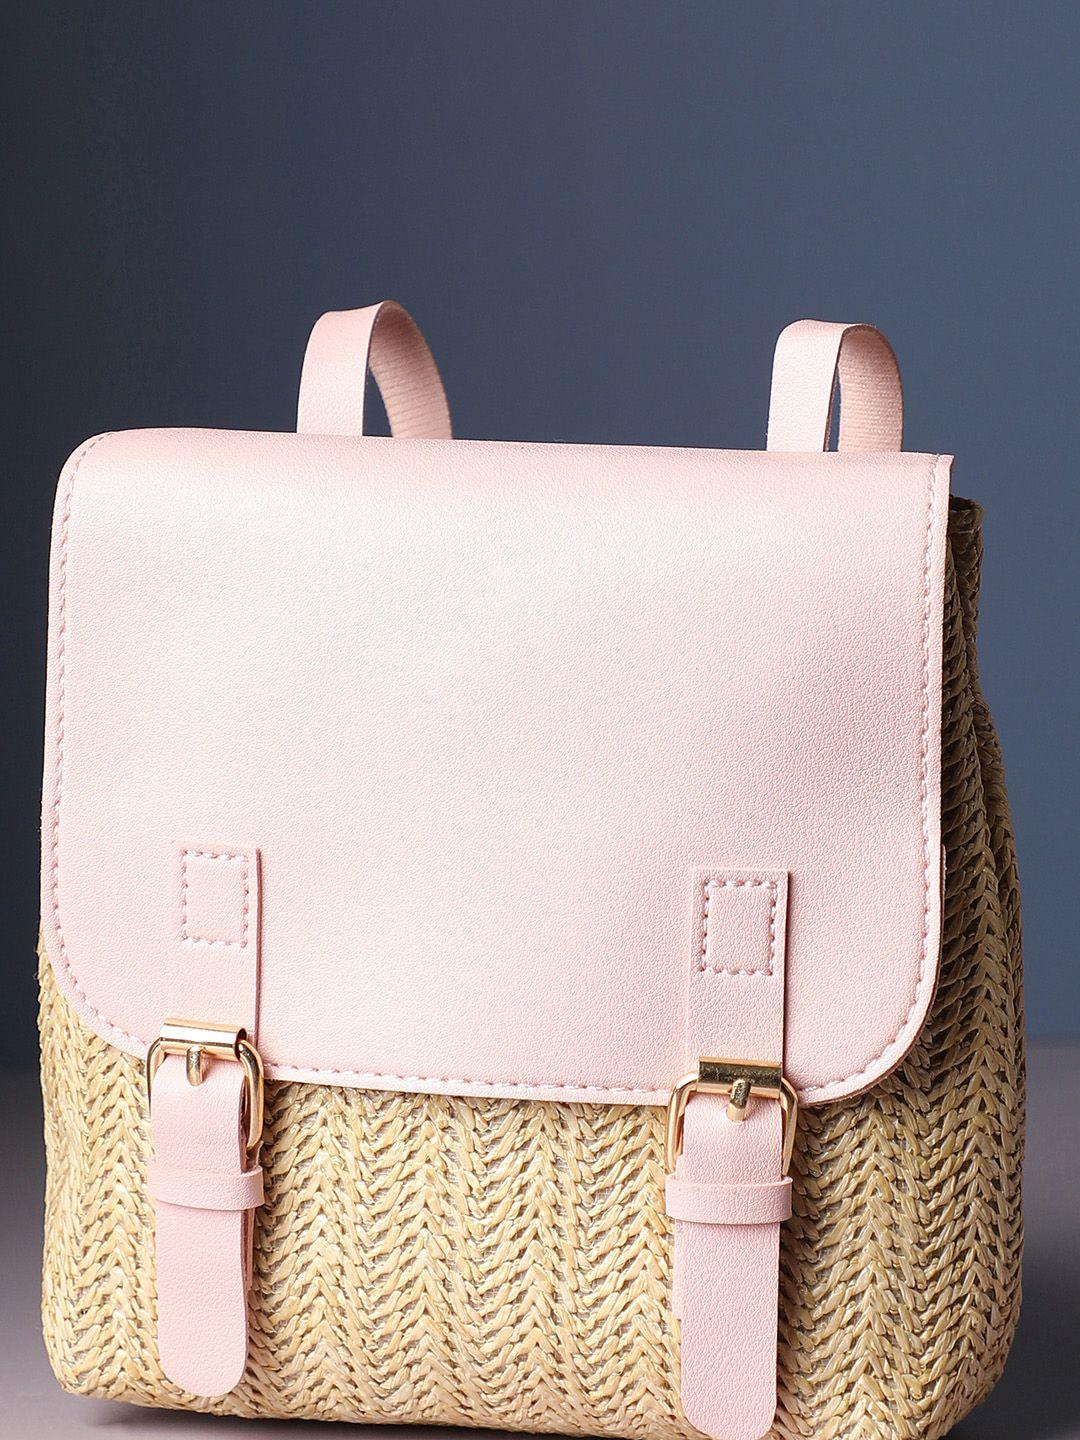 haute sauce by campus sutra pink pu structured handheld bag